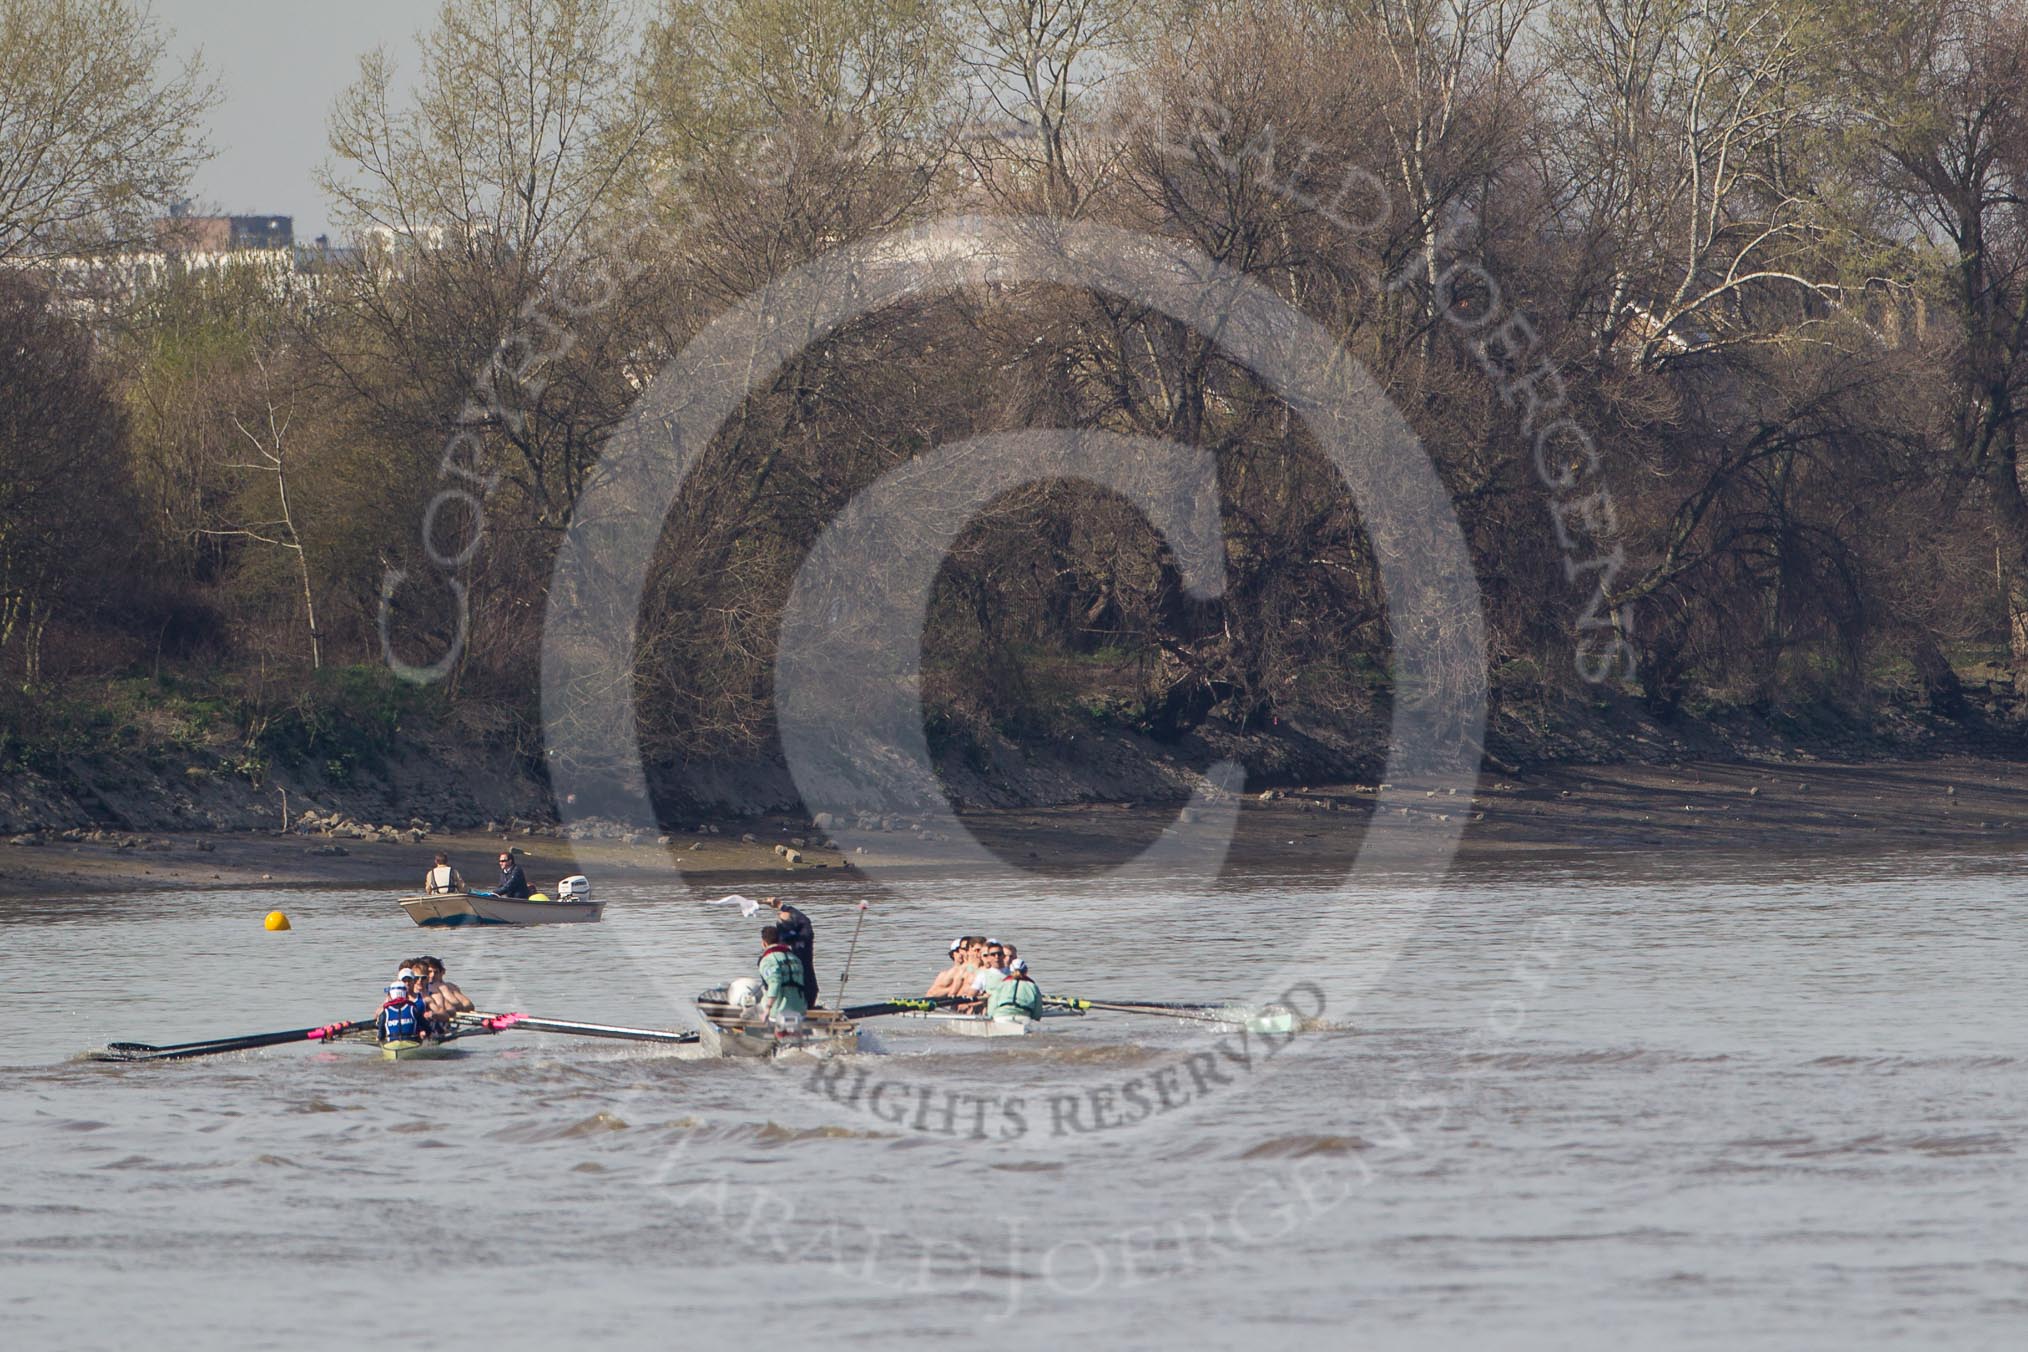 The Boat Race season 2012 - fixture CUBC vs Molesey BC: CUBC Goldie v Imperial fixture: The Imperial boat on the left, behind umpire Simon Harris..




on 25 March 2012 at 14:48, image #67